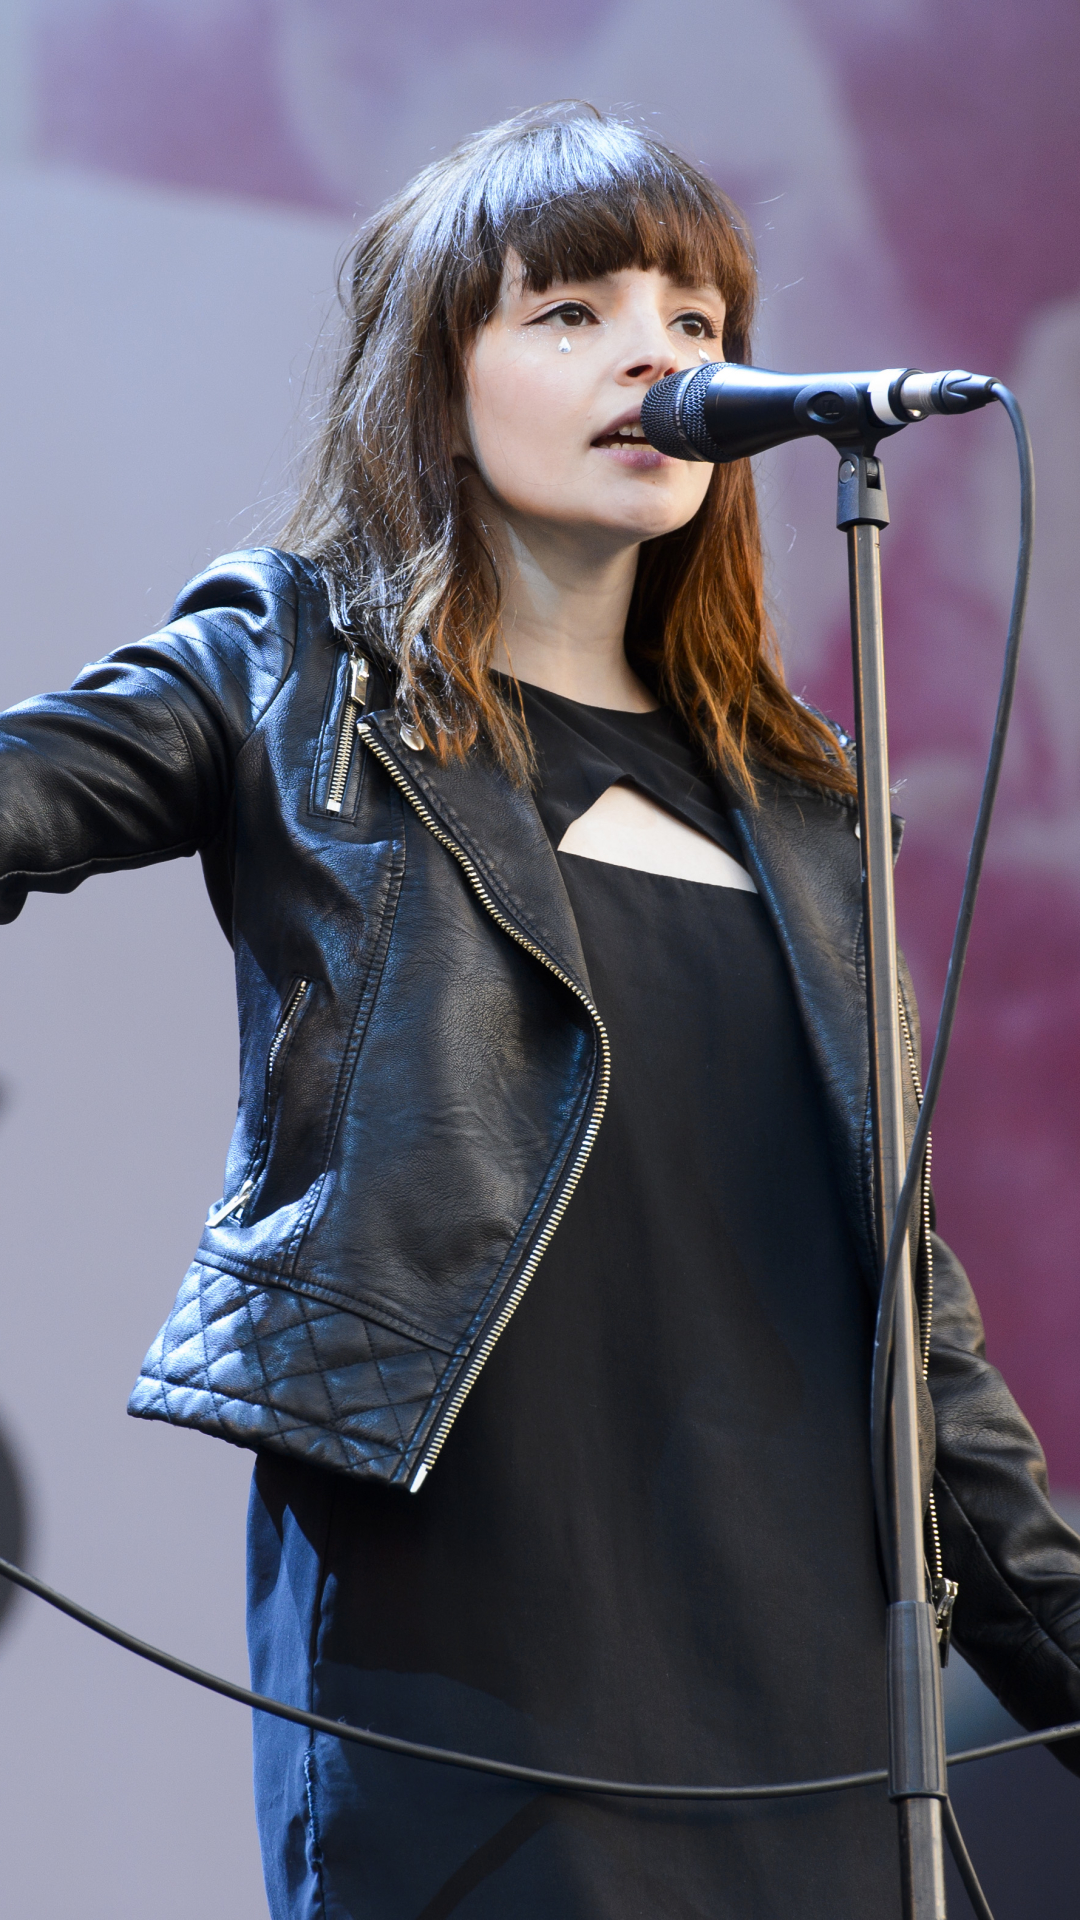 music, chvrches cell phone wallpapers